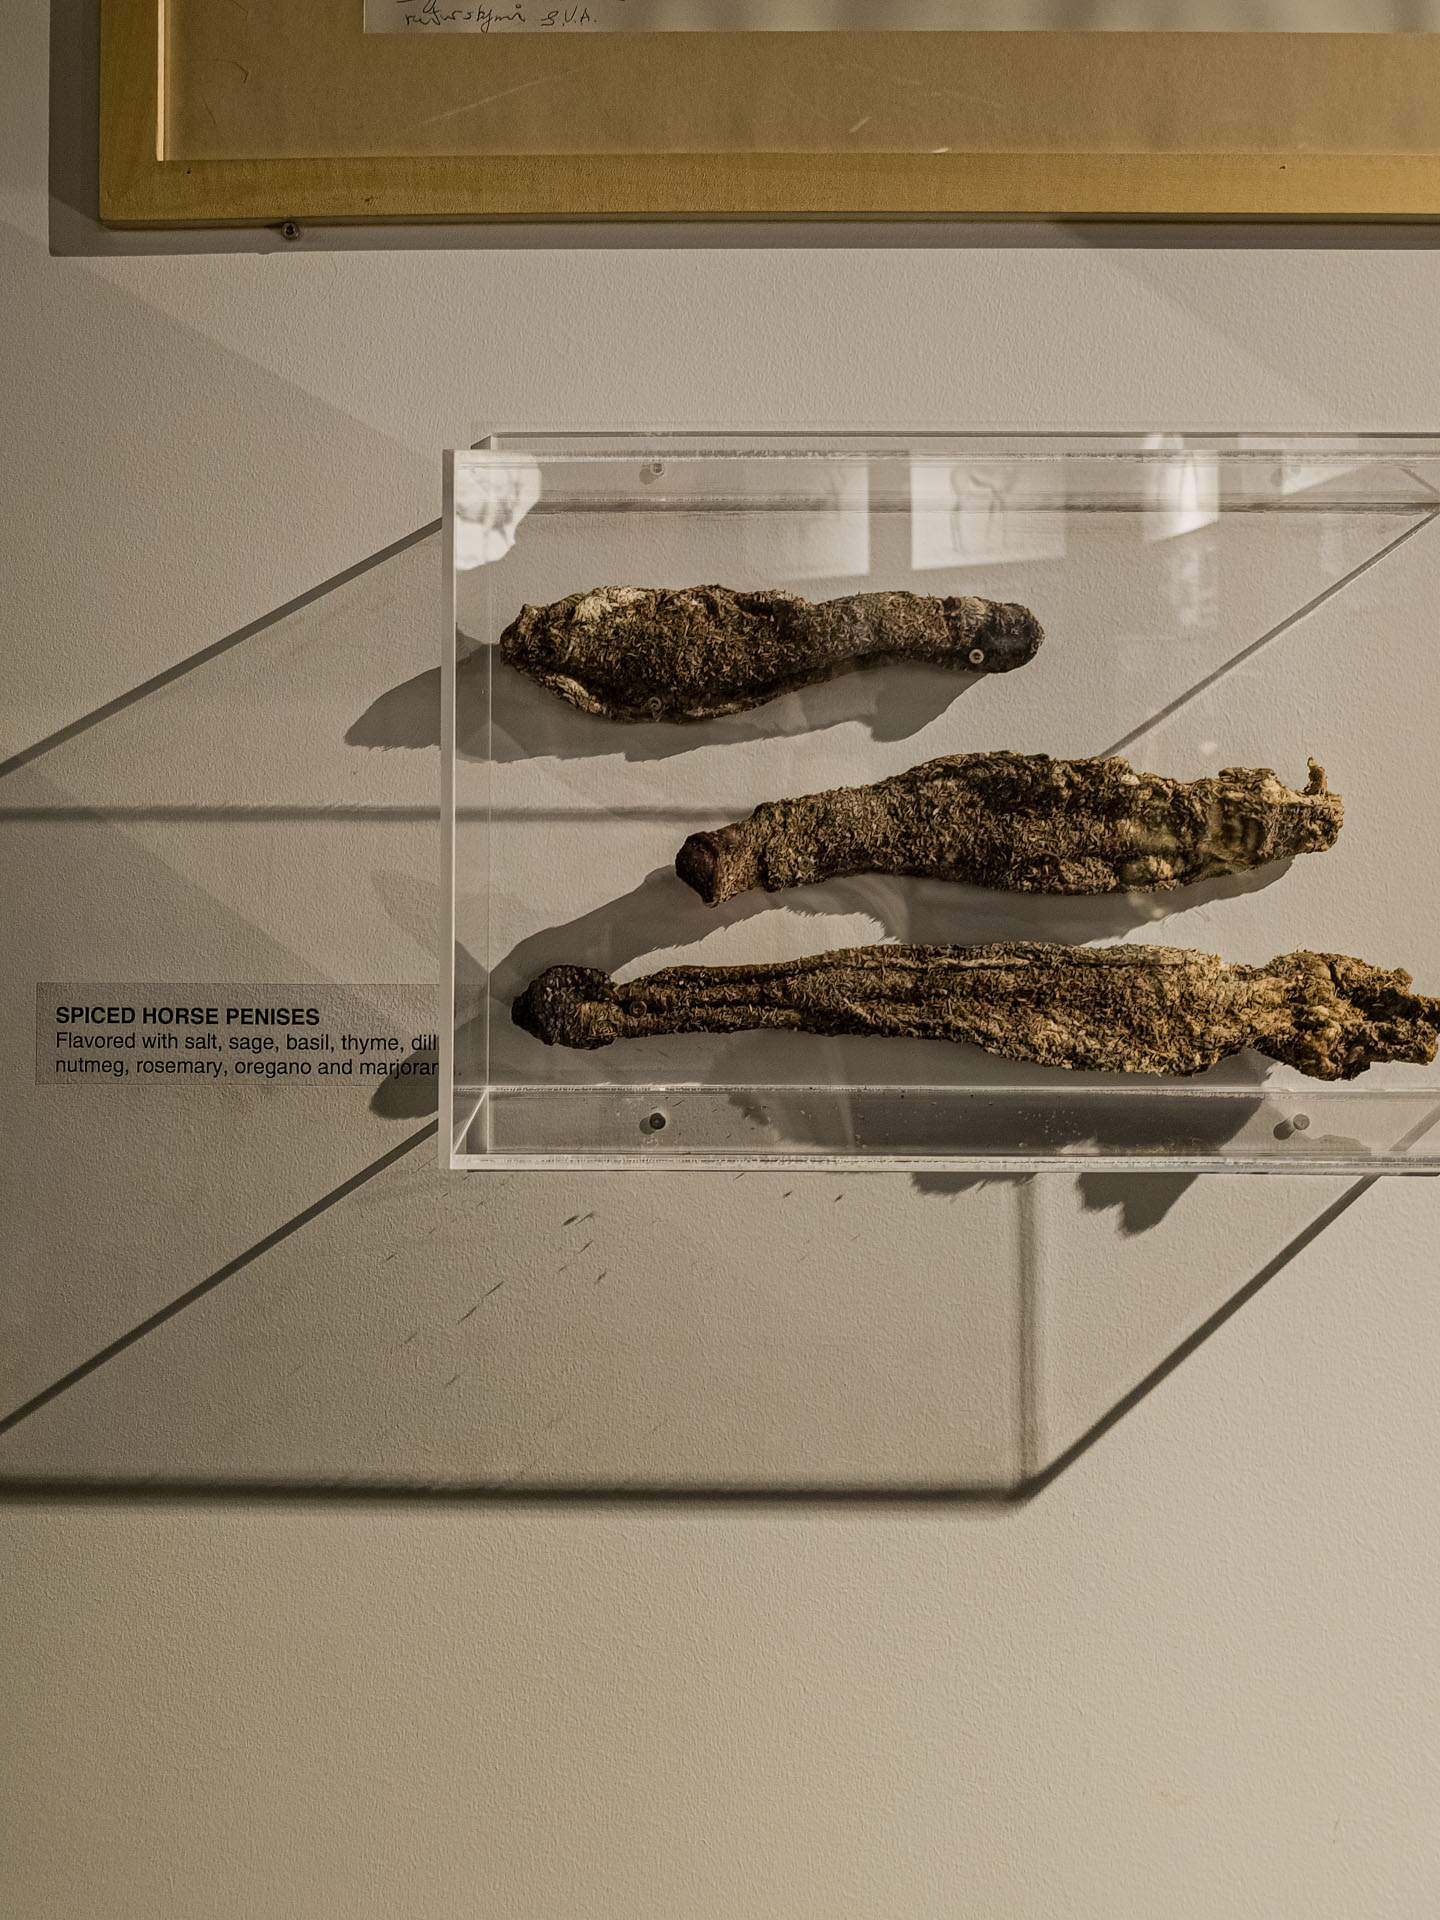 Spiced horse penis to eat at the Icelandic Phallological Museum in Reykjavik